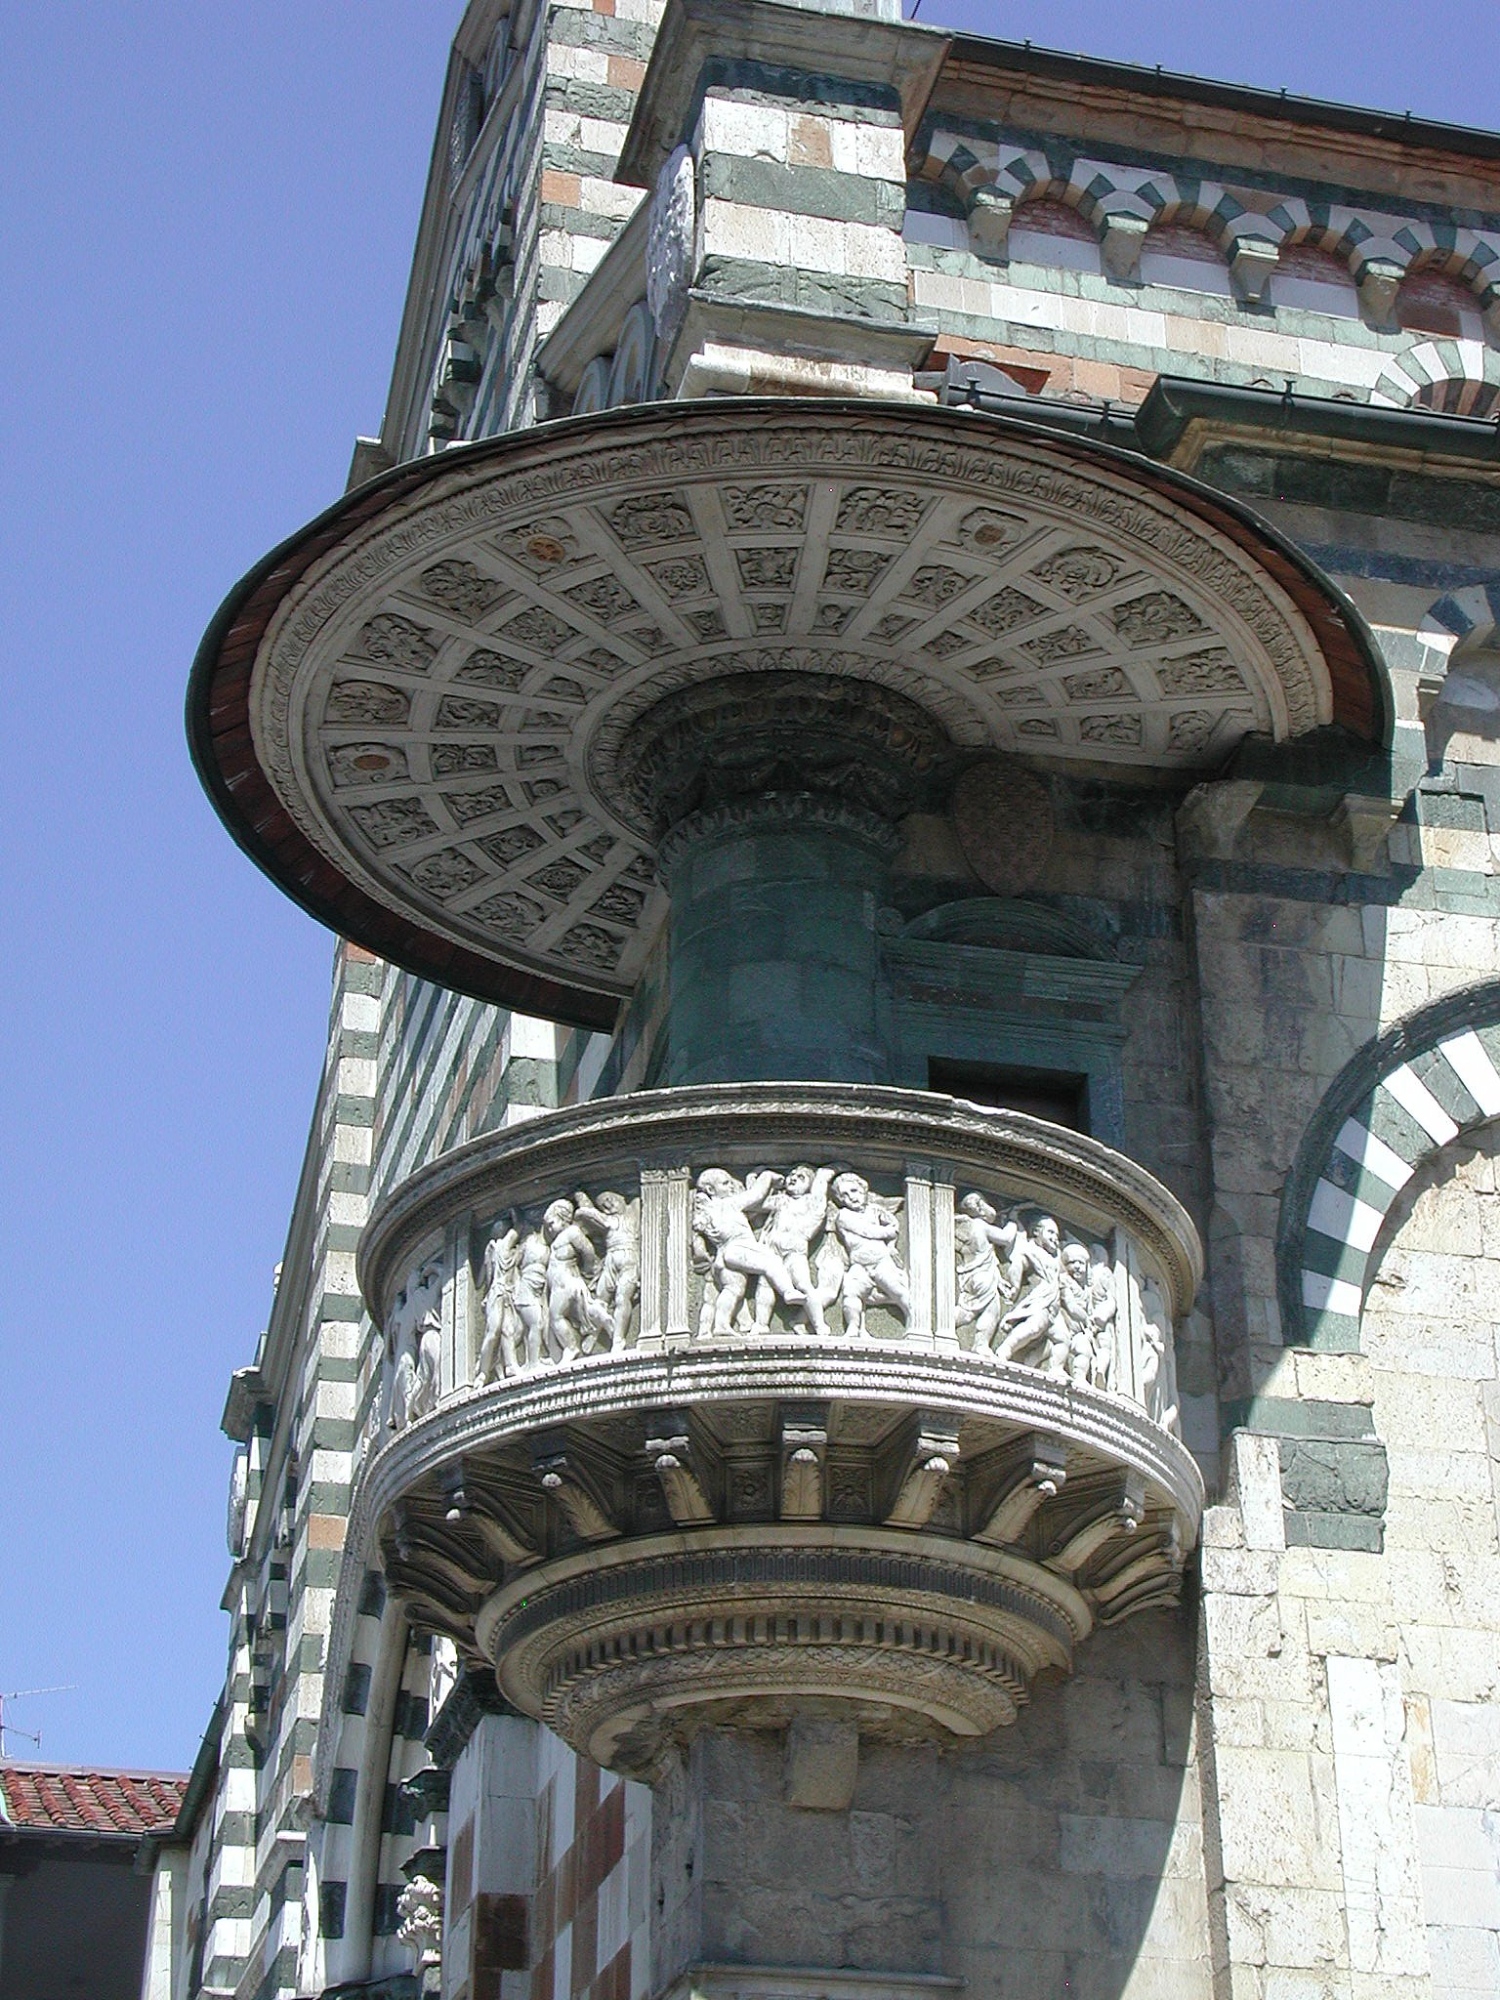 The pulpit by Donatello and Michelozzo on Prato's Cathedral